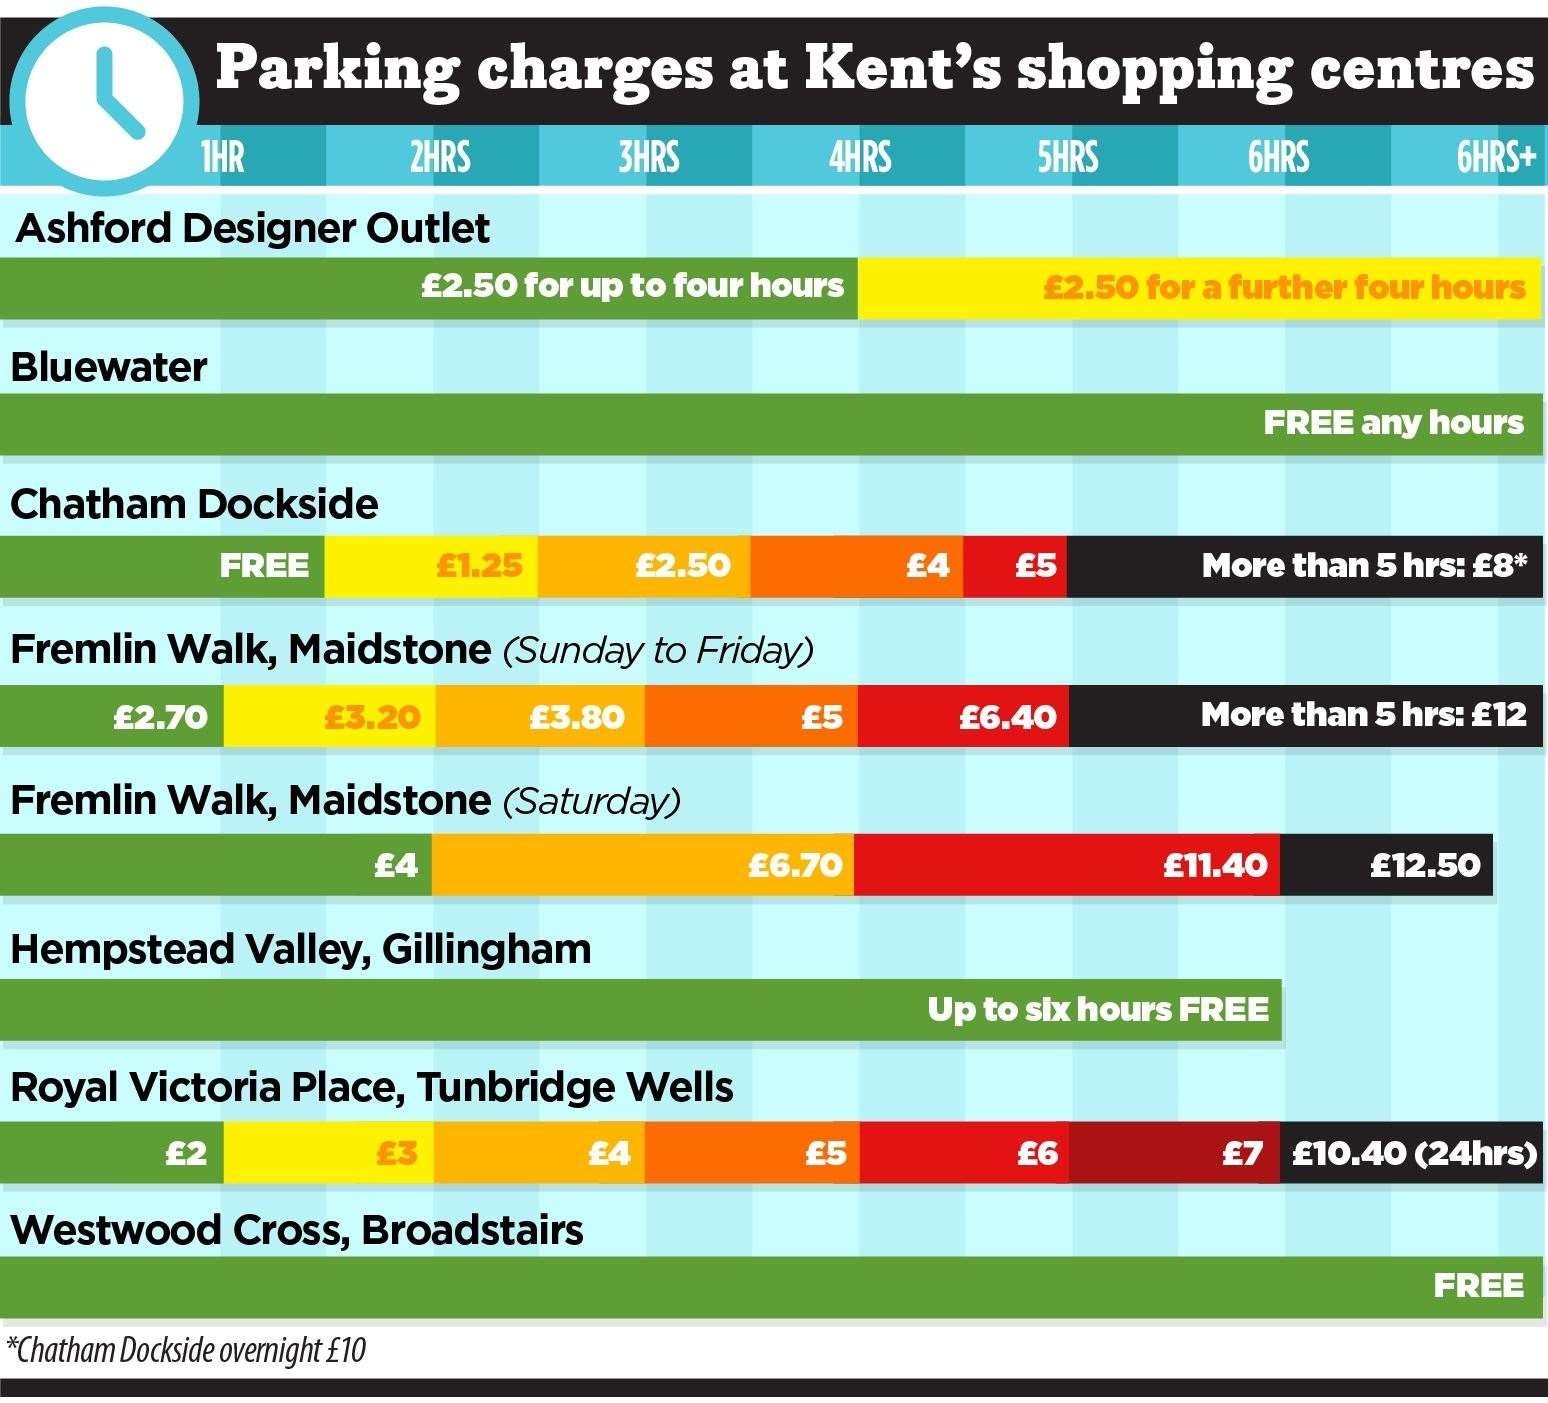 How Ashford Designer Outlet compares with other shopping centres in Kent